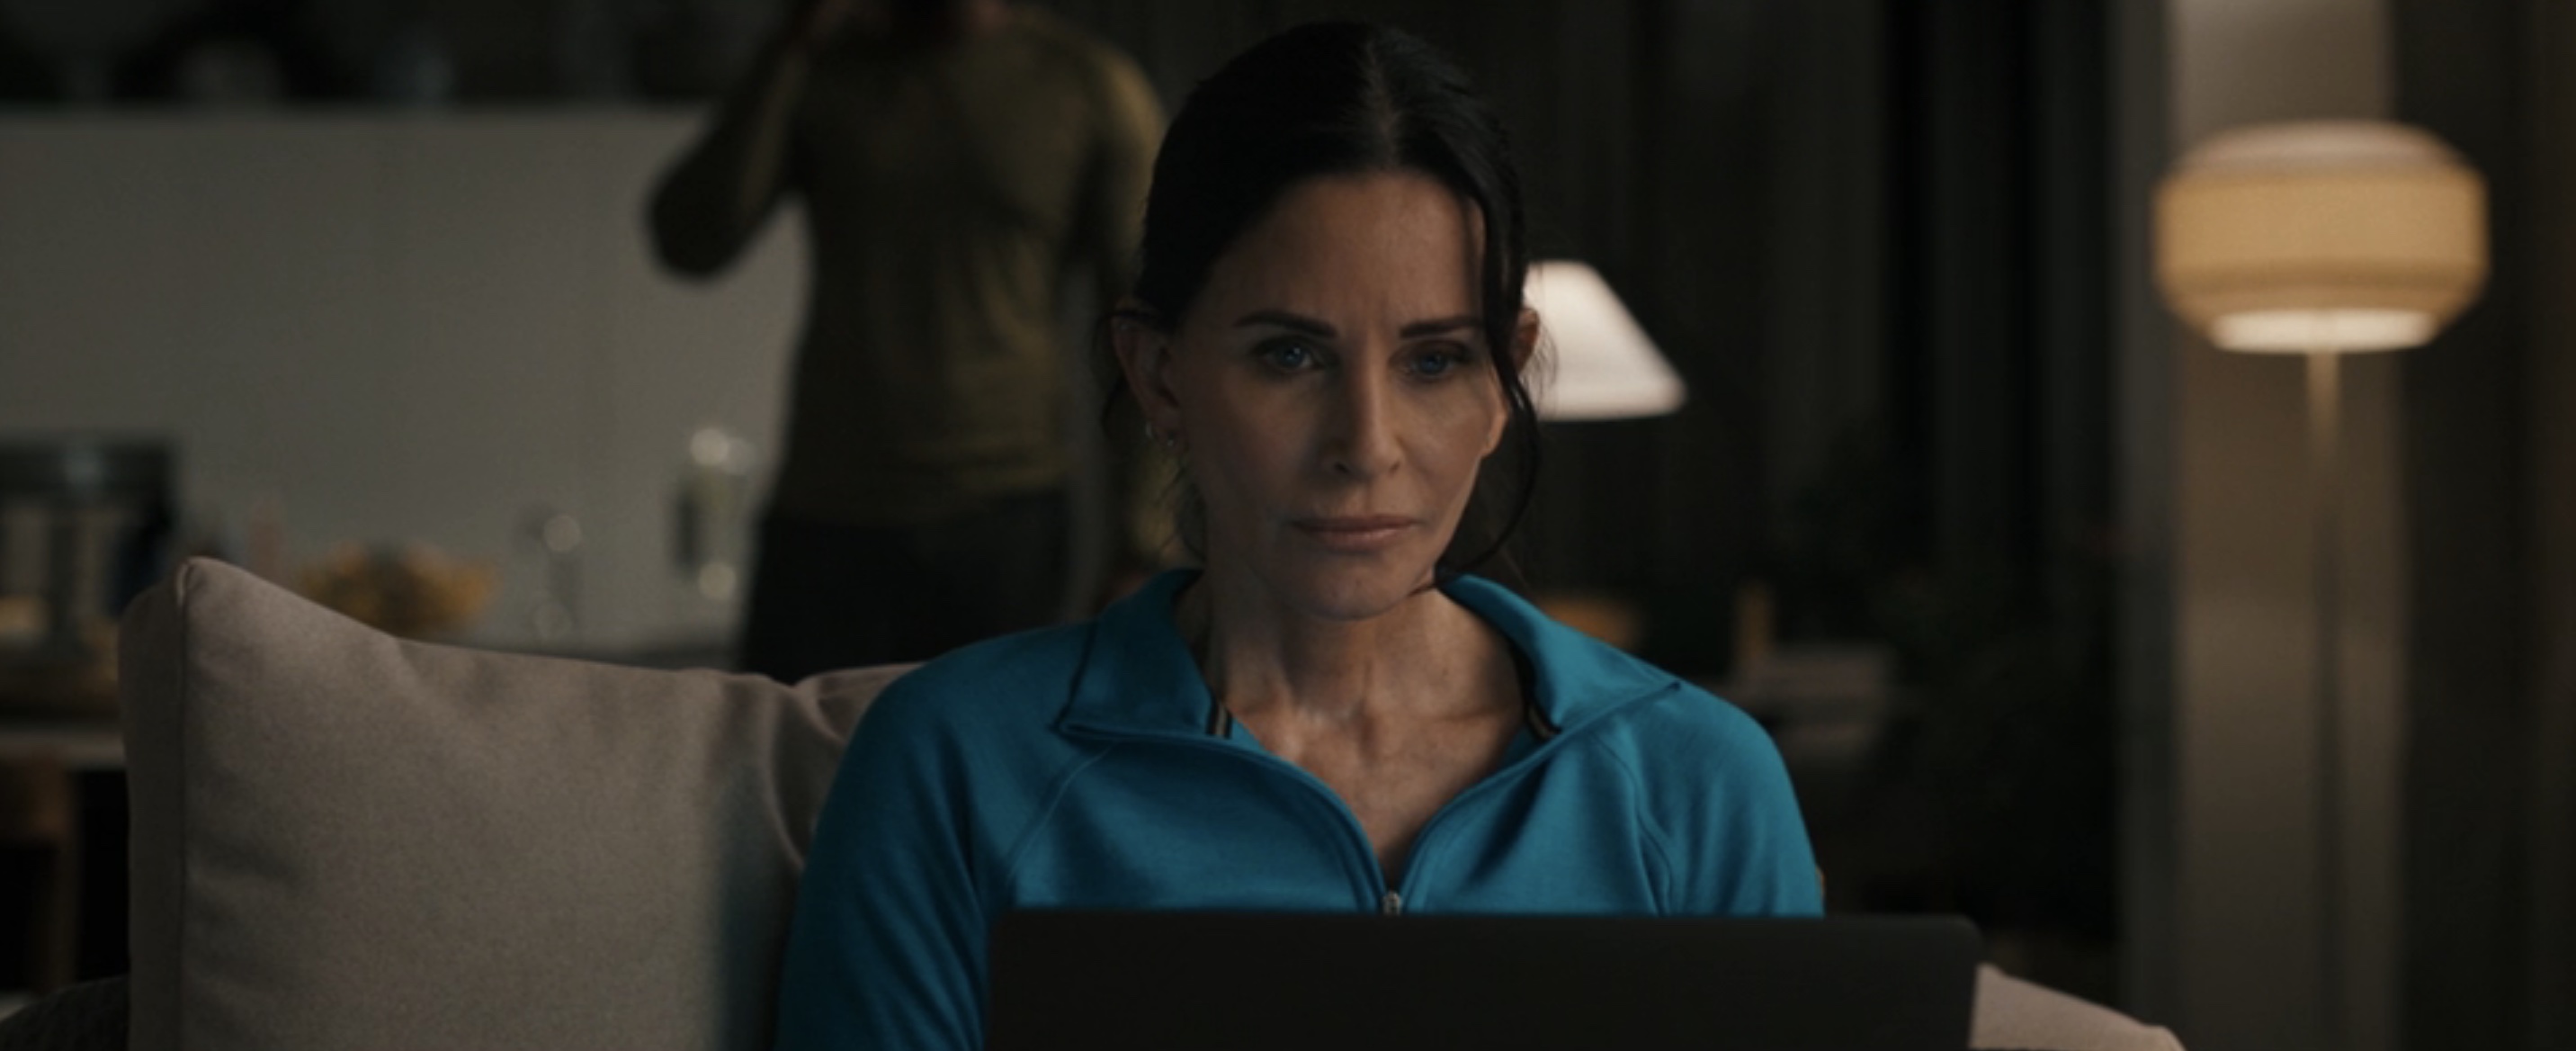 Scream VI Cast on Paramount+ - Courteney Cox as Gale Weathers